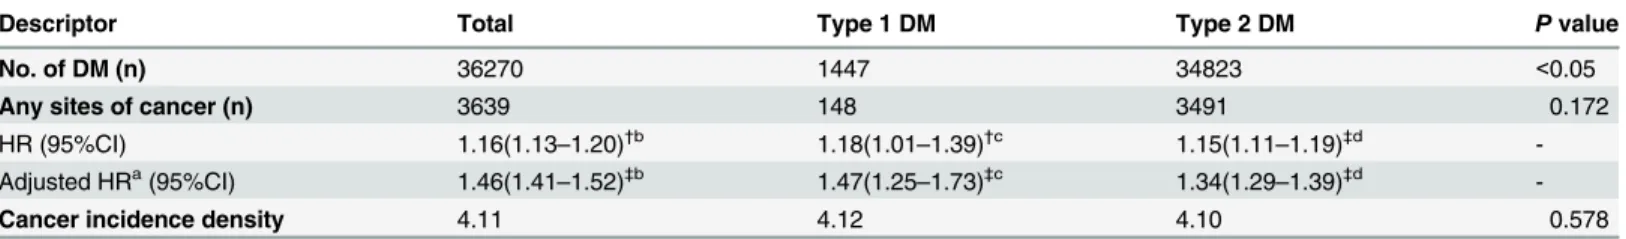 Table 3. The characteristics of patients with DM (n = 36270).